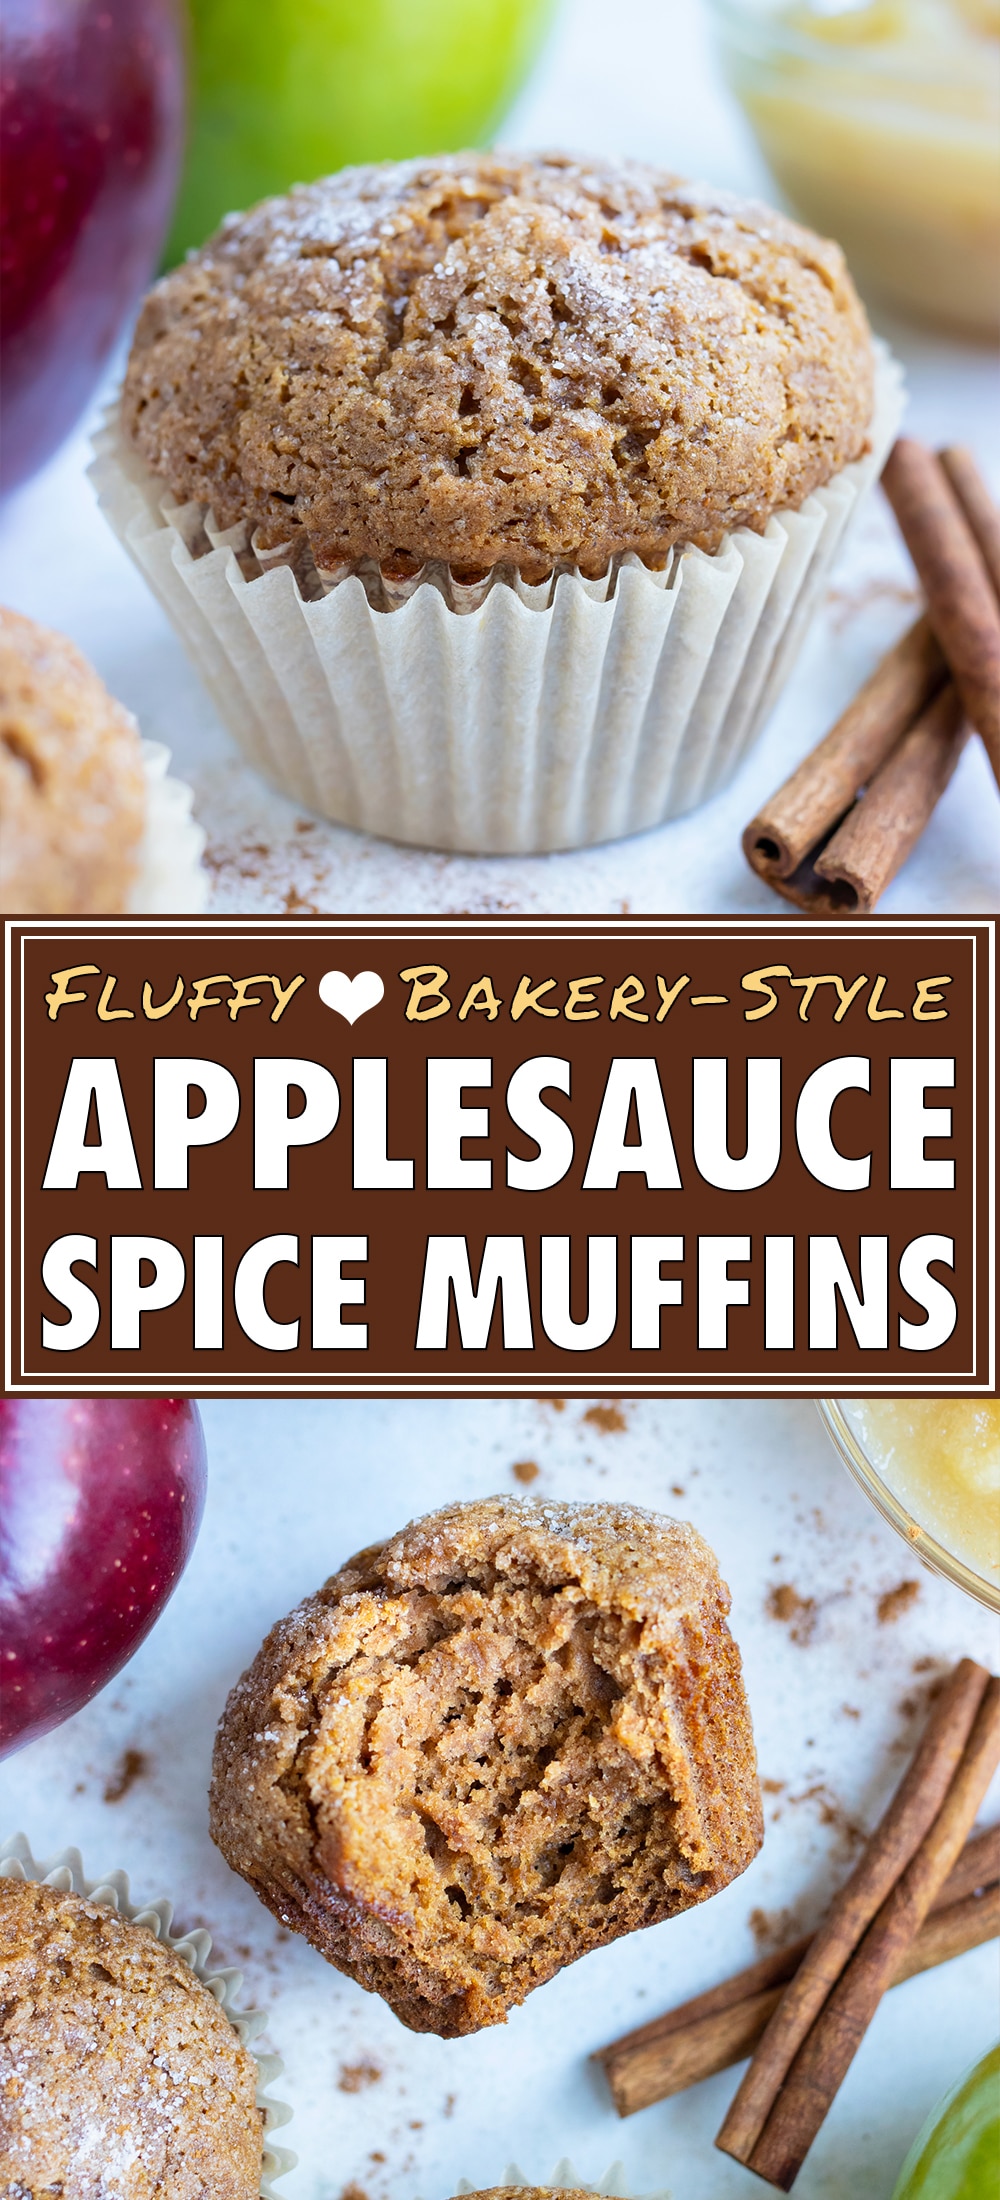 Healthy Applesauce Muffins Recipe - Evolving Table